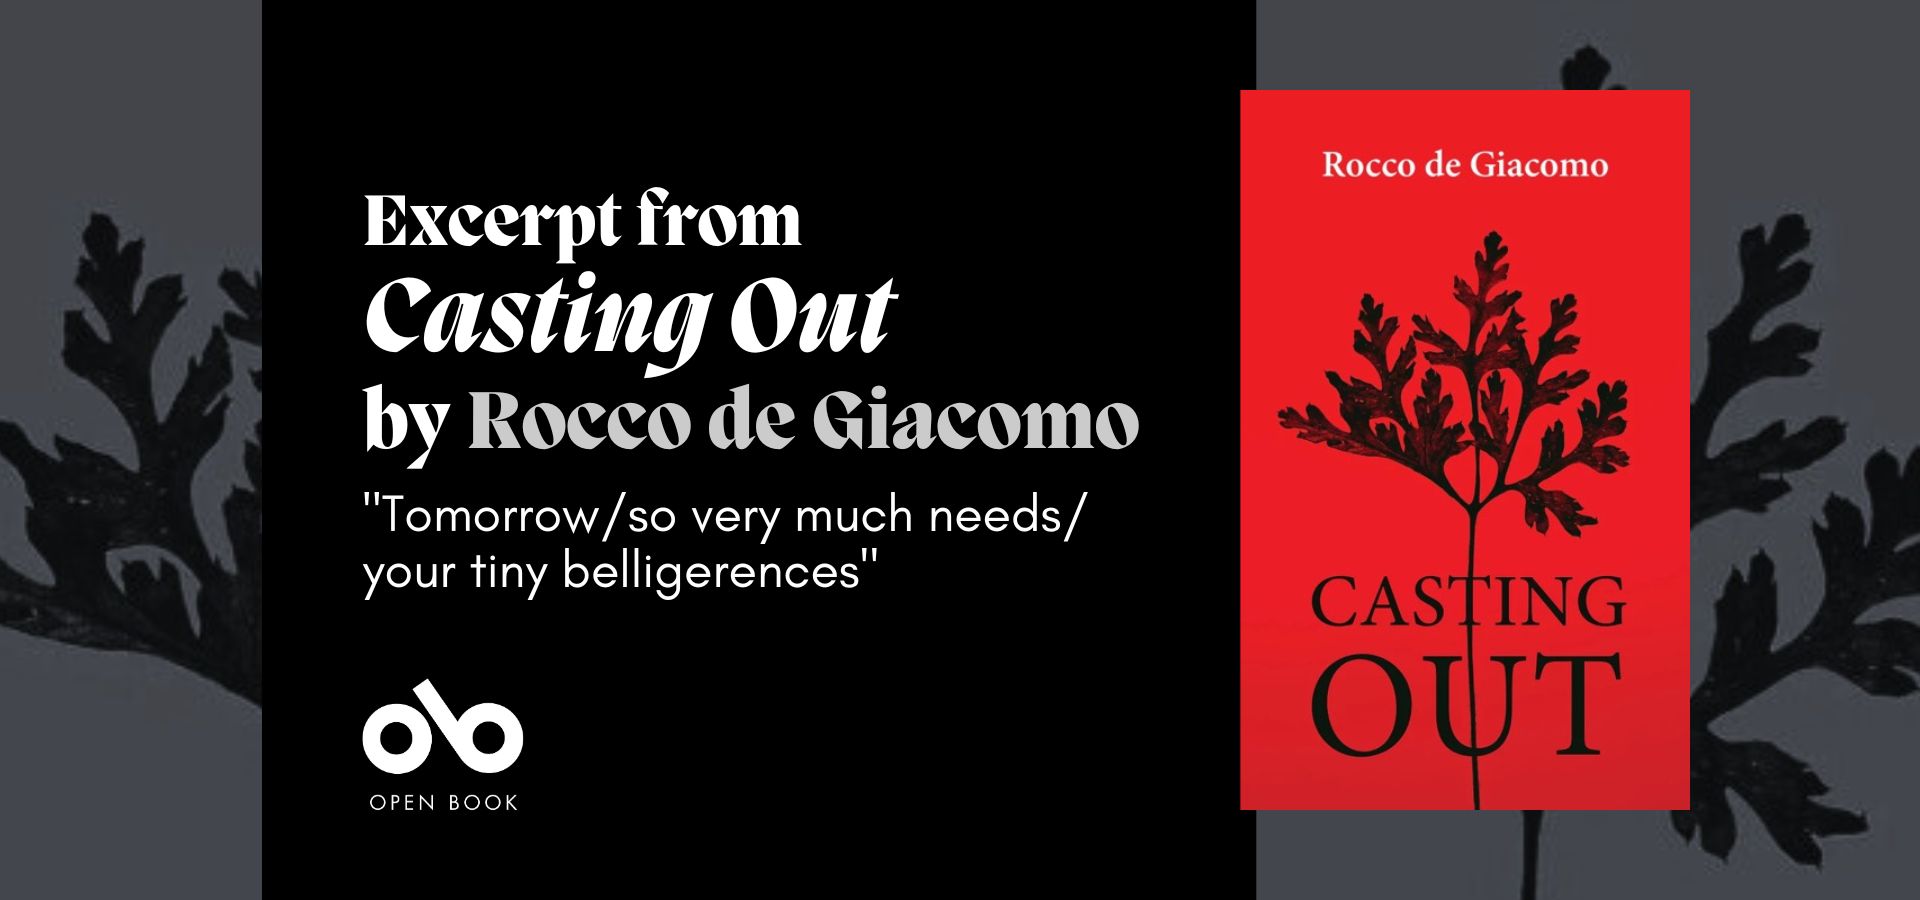 black banner image with an image of the cover of Rocco de Giacomo's poetry collection Casting Out and text reading "Excerpt from Casting Out by Rocco de Giacomo. Tomorrow/so very much needs/ your tiny belligerences"